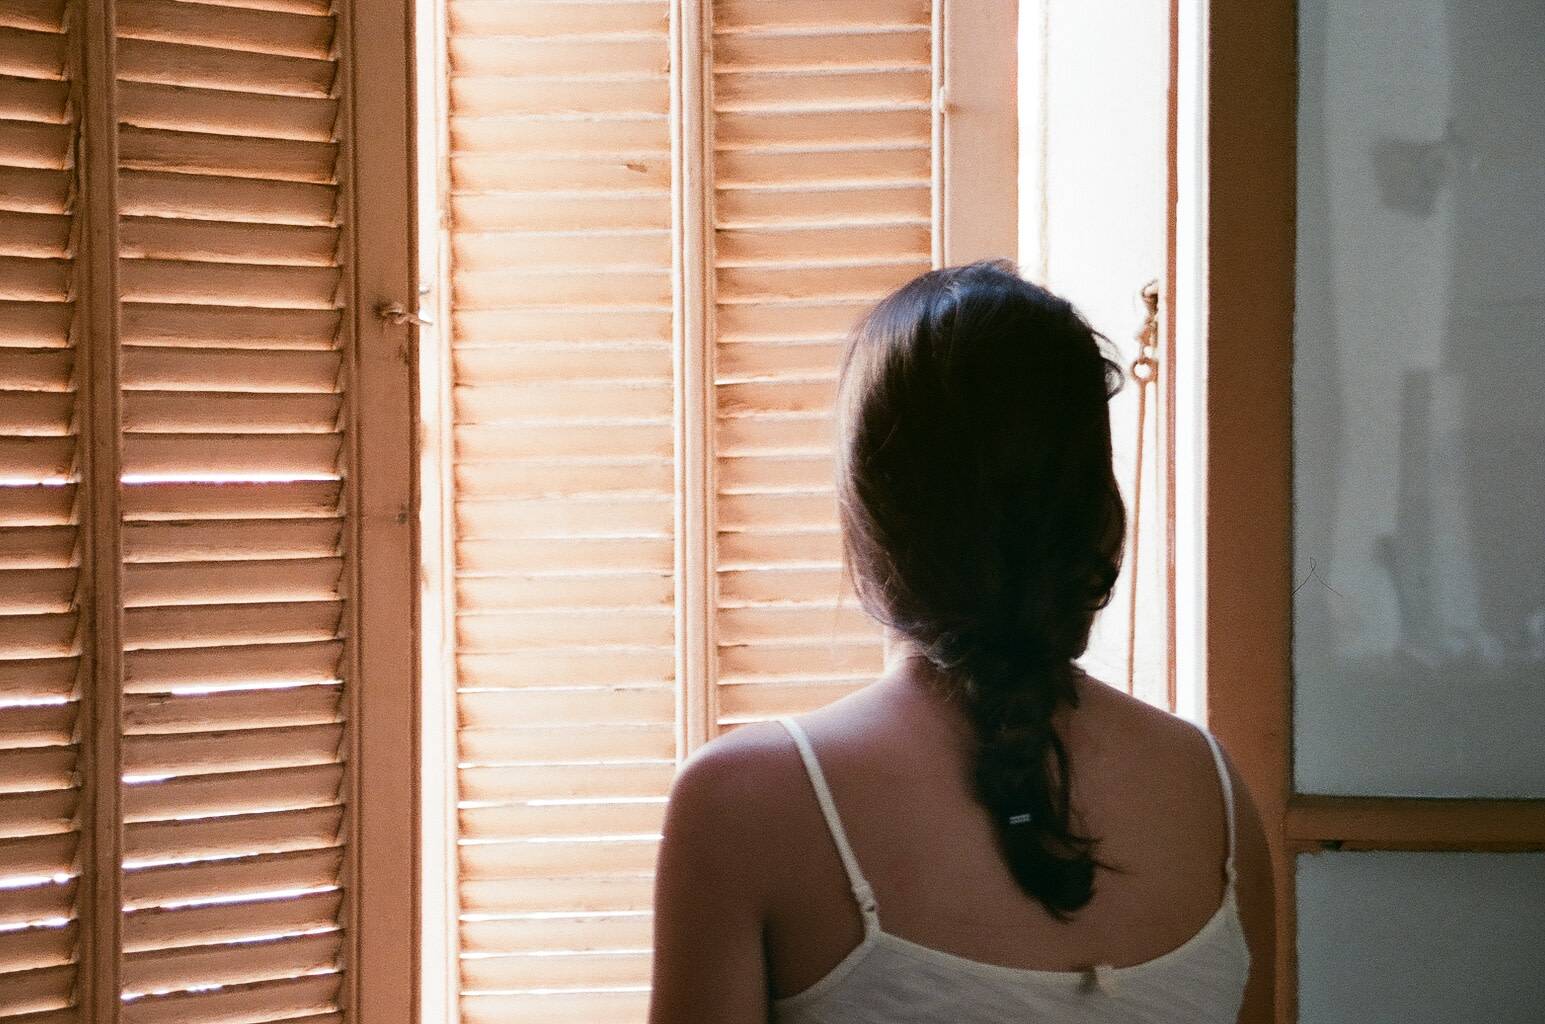 a woman seen from behind looking outside through the window where the wooden blinds are barely open